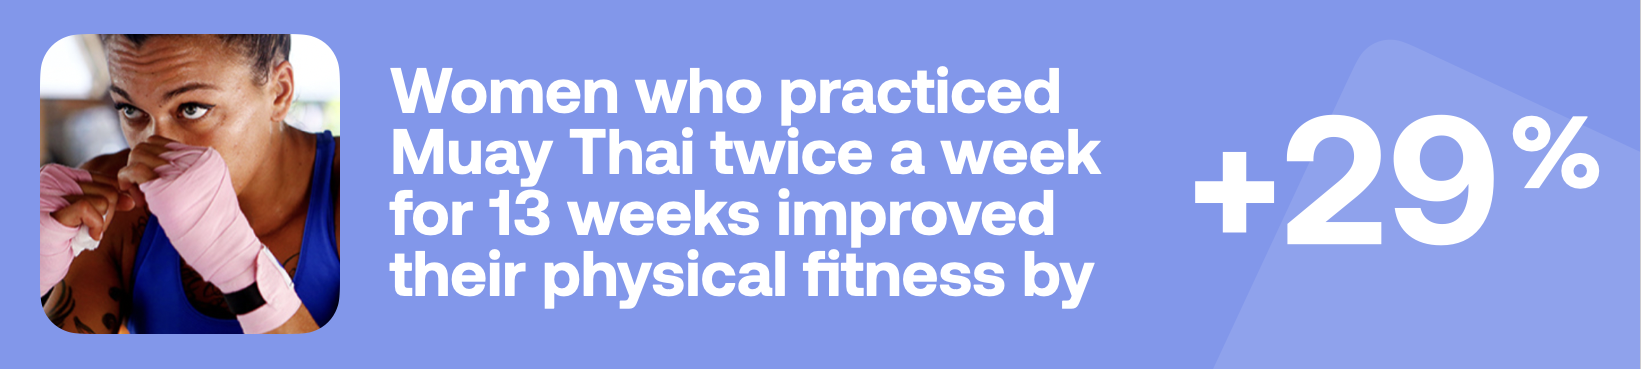 Women who practiced Muay Thai twice a week for 13 weeks improved their physical fitness by +29%